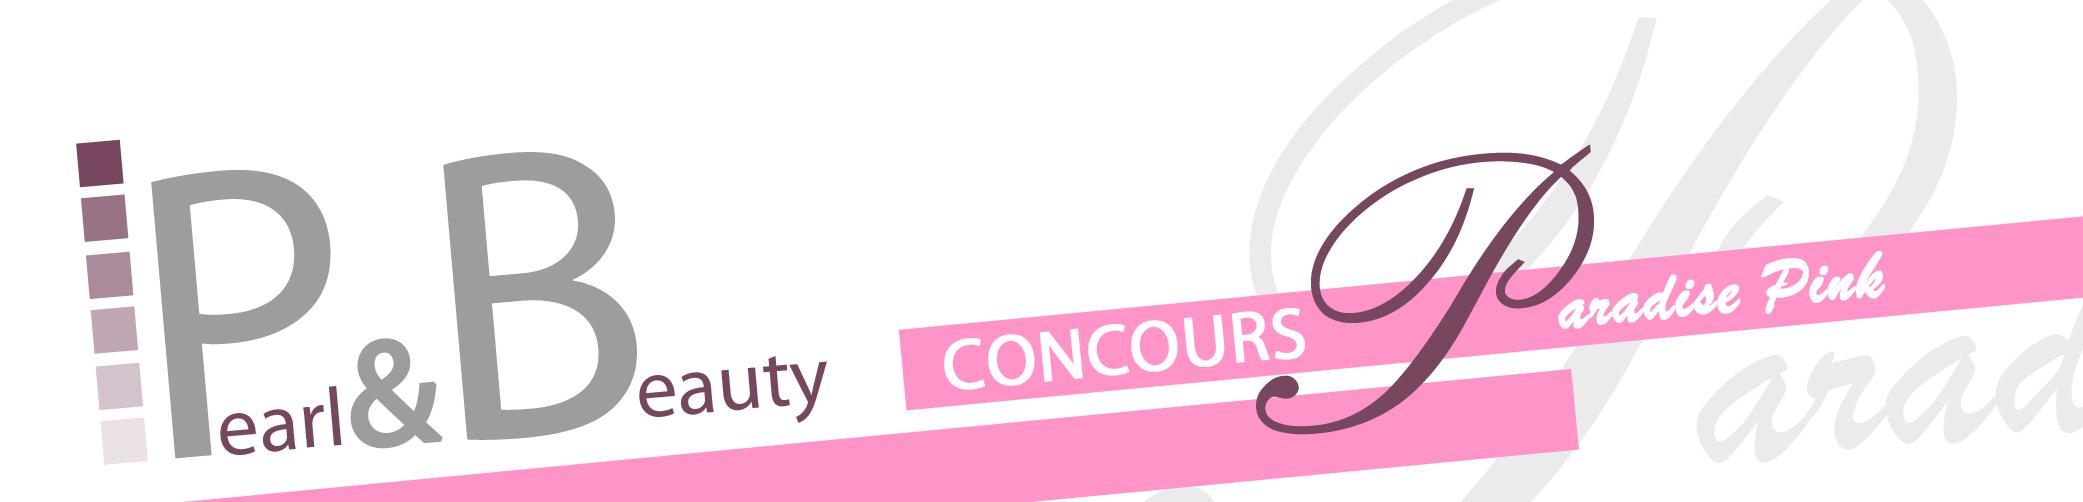 Concours | Paradise Pink #2